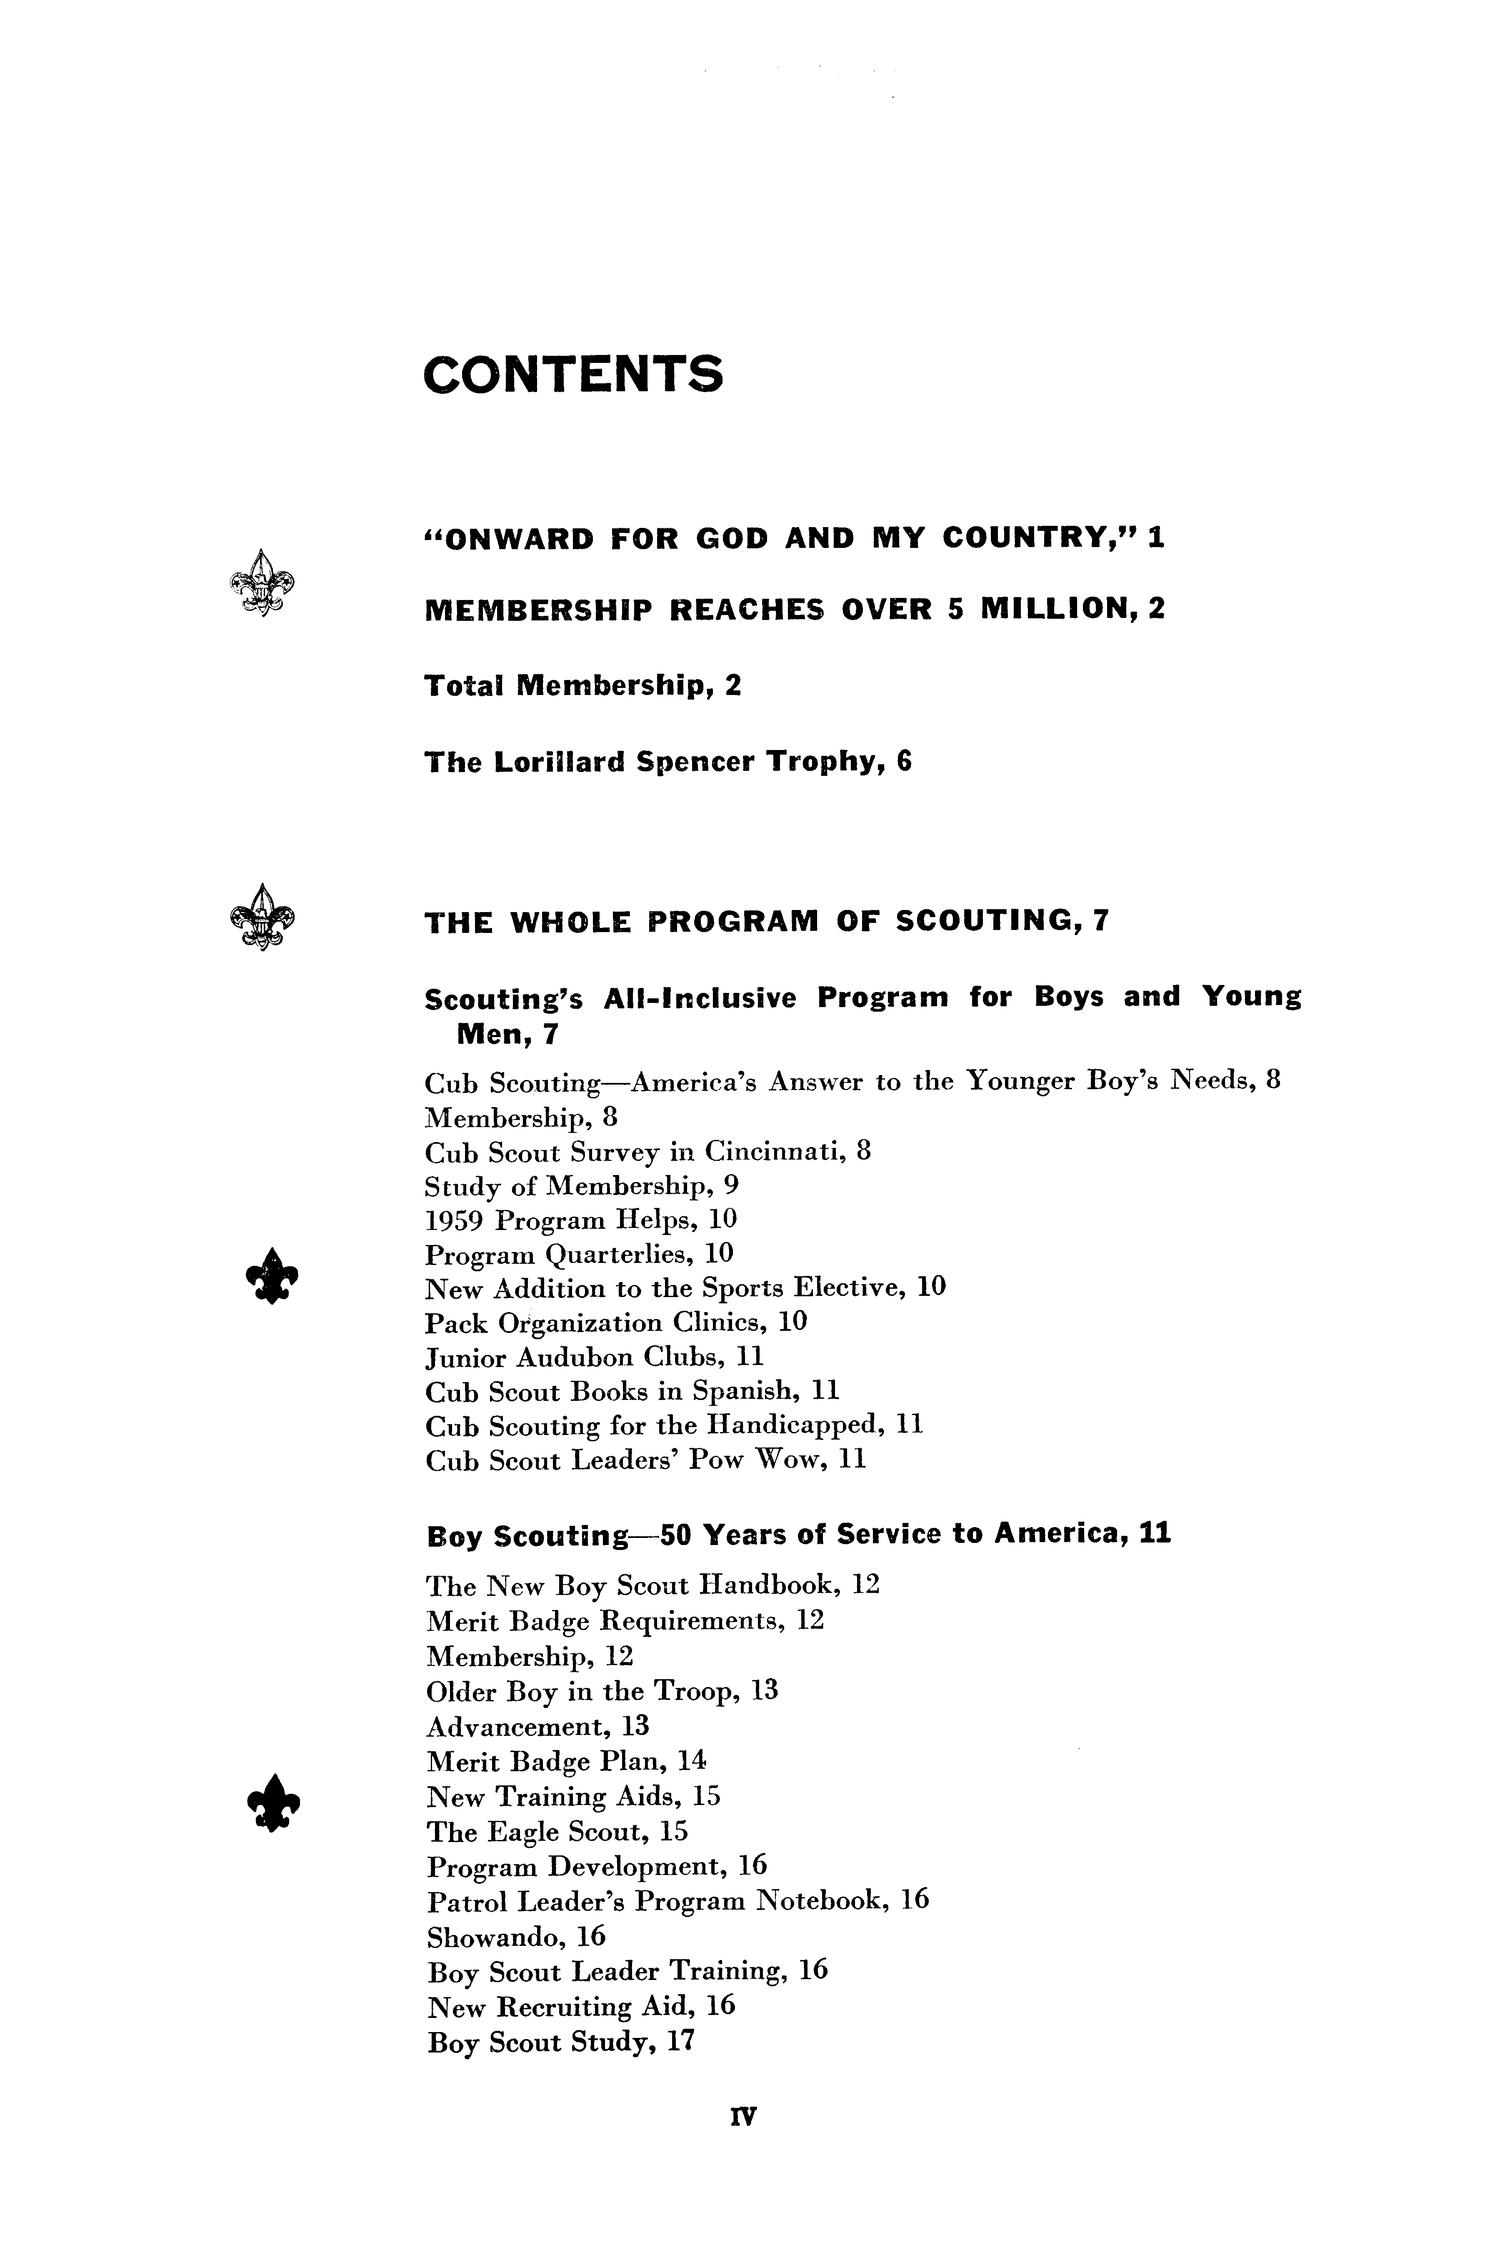 Annual Report of the Boy Scouts of America: 1959
                                                
                                                    IV
                                                